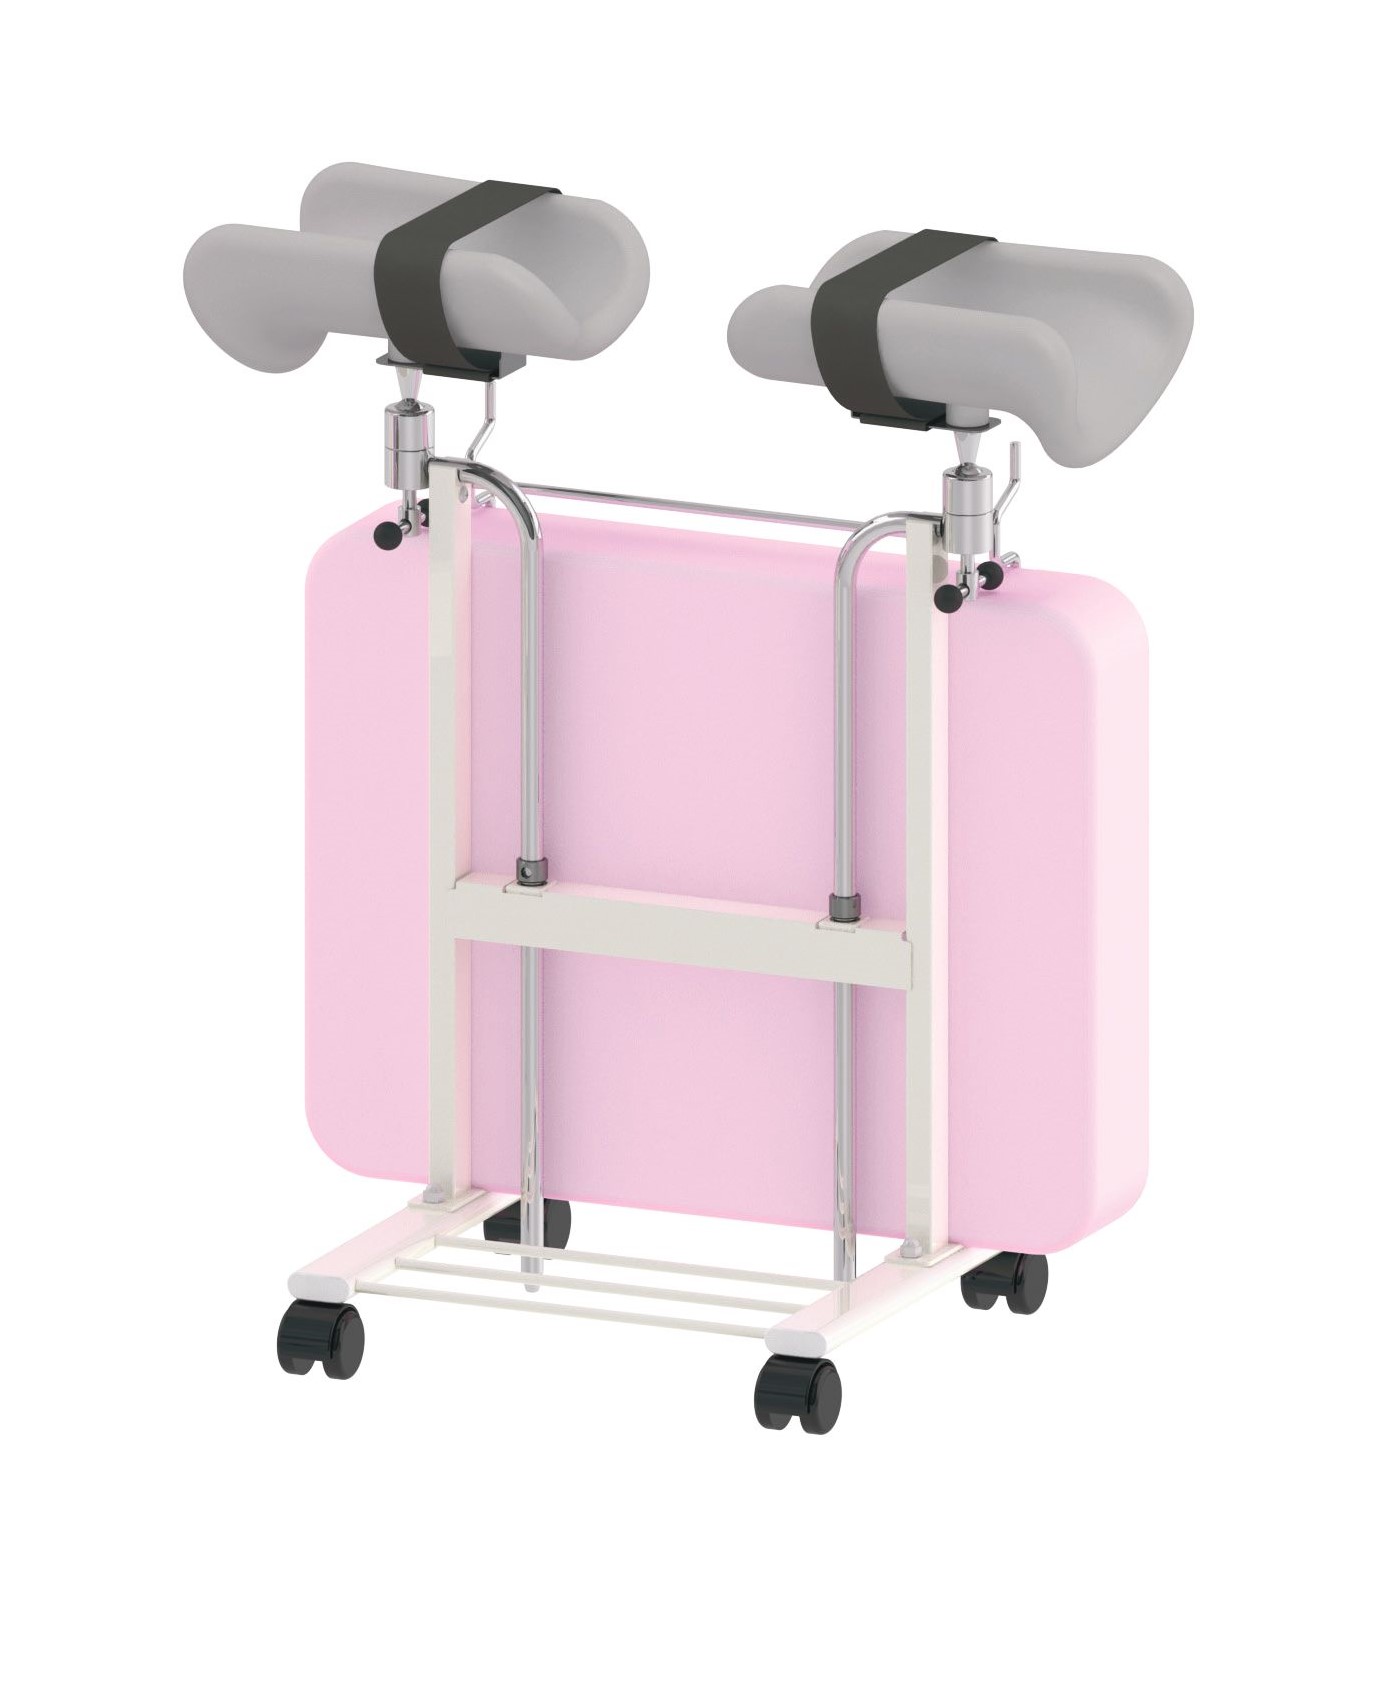 Electrically adjustable obstetrics and gynecology examination bed, model PD-250